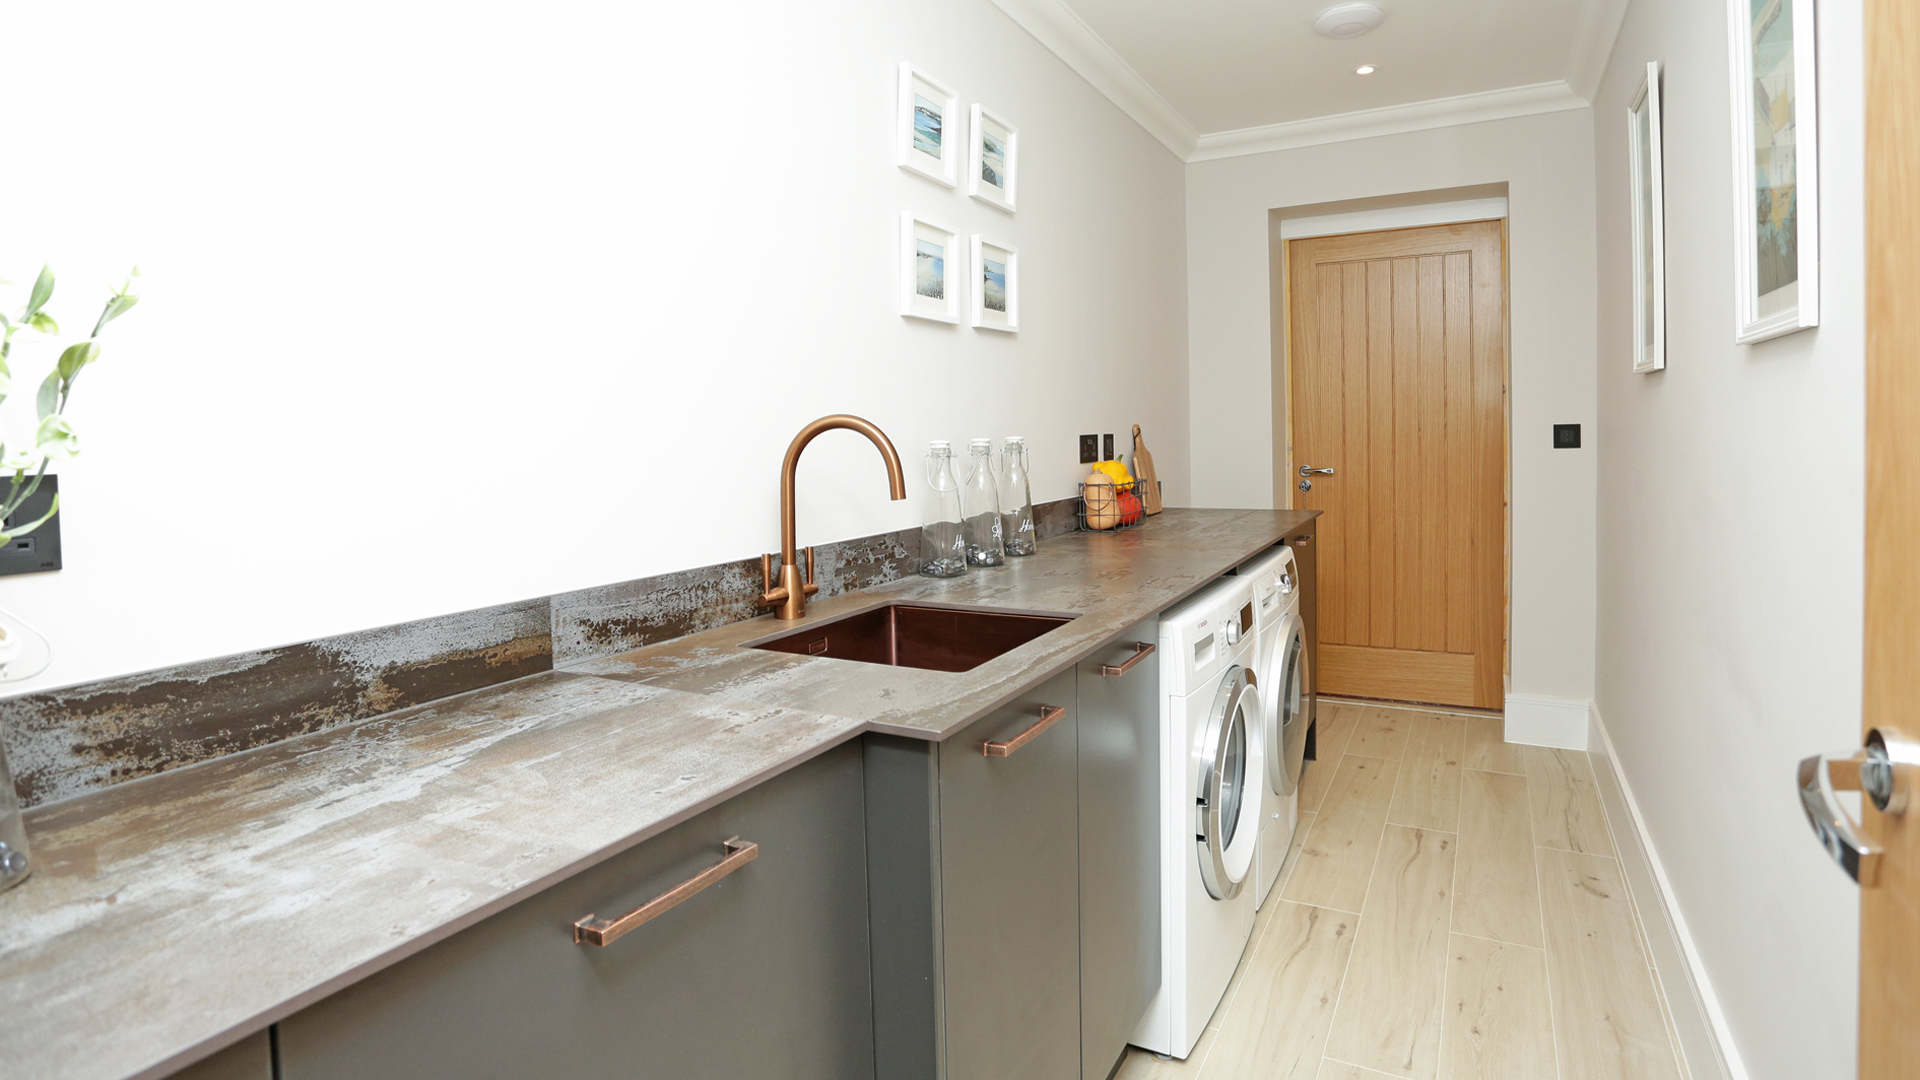 Utility room with sink and appliances at Plot 14 Weavers park.